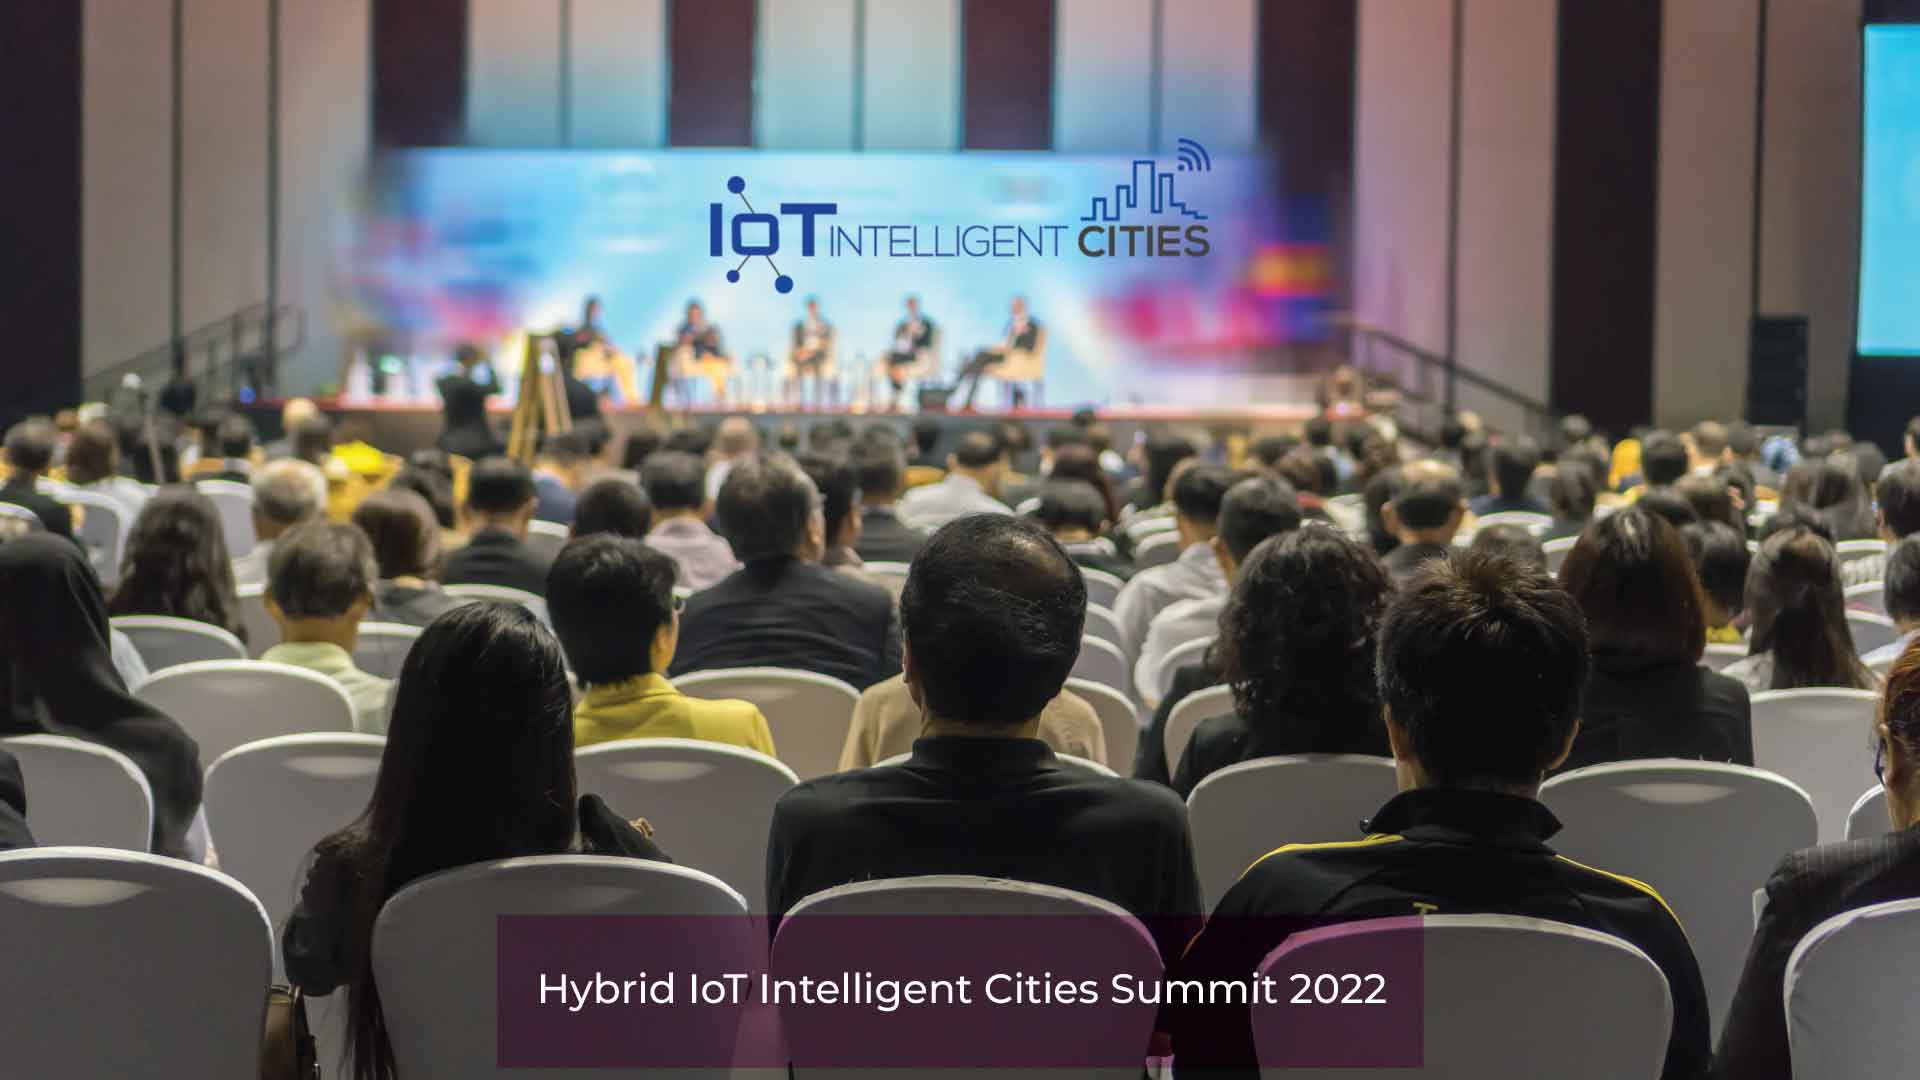 Toronto-based IoT Intelligent Cities Summit 2022 to be held in Hybrid Format